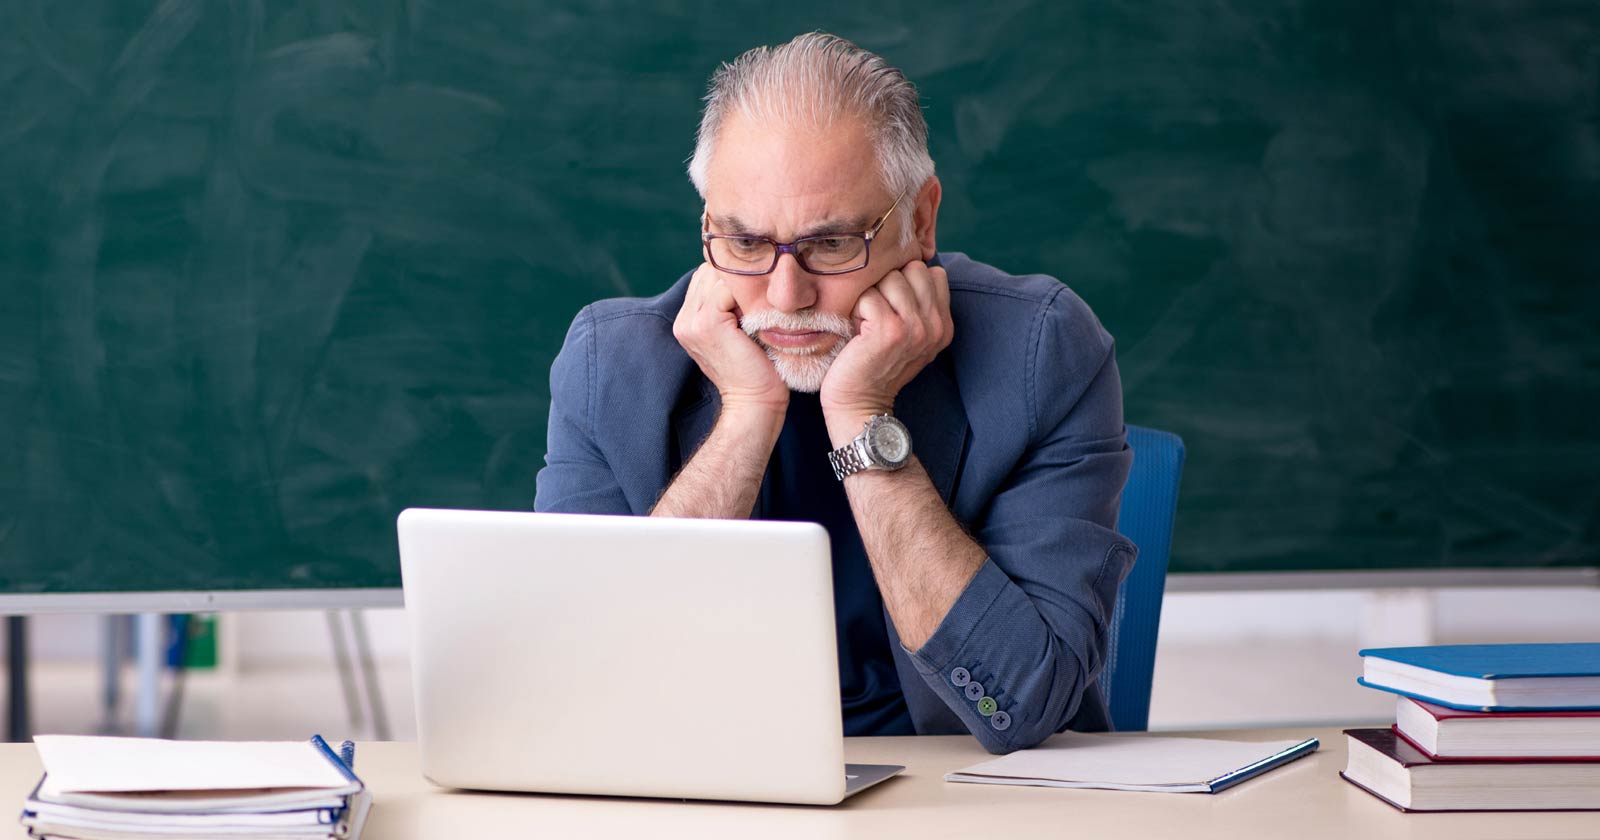 Image of an Educator staring into a laptop with concern